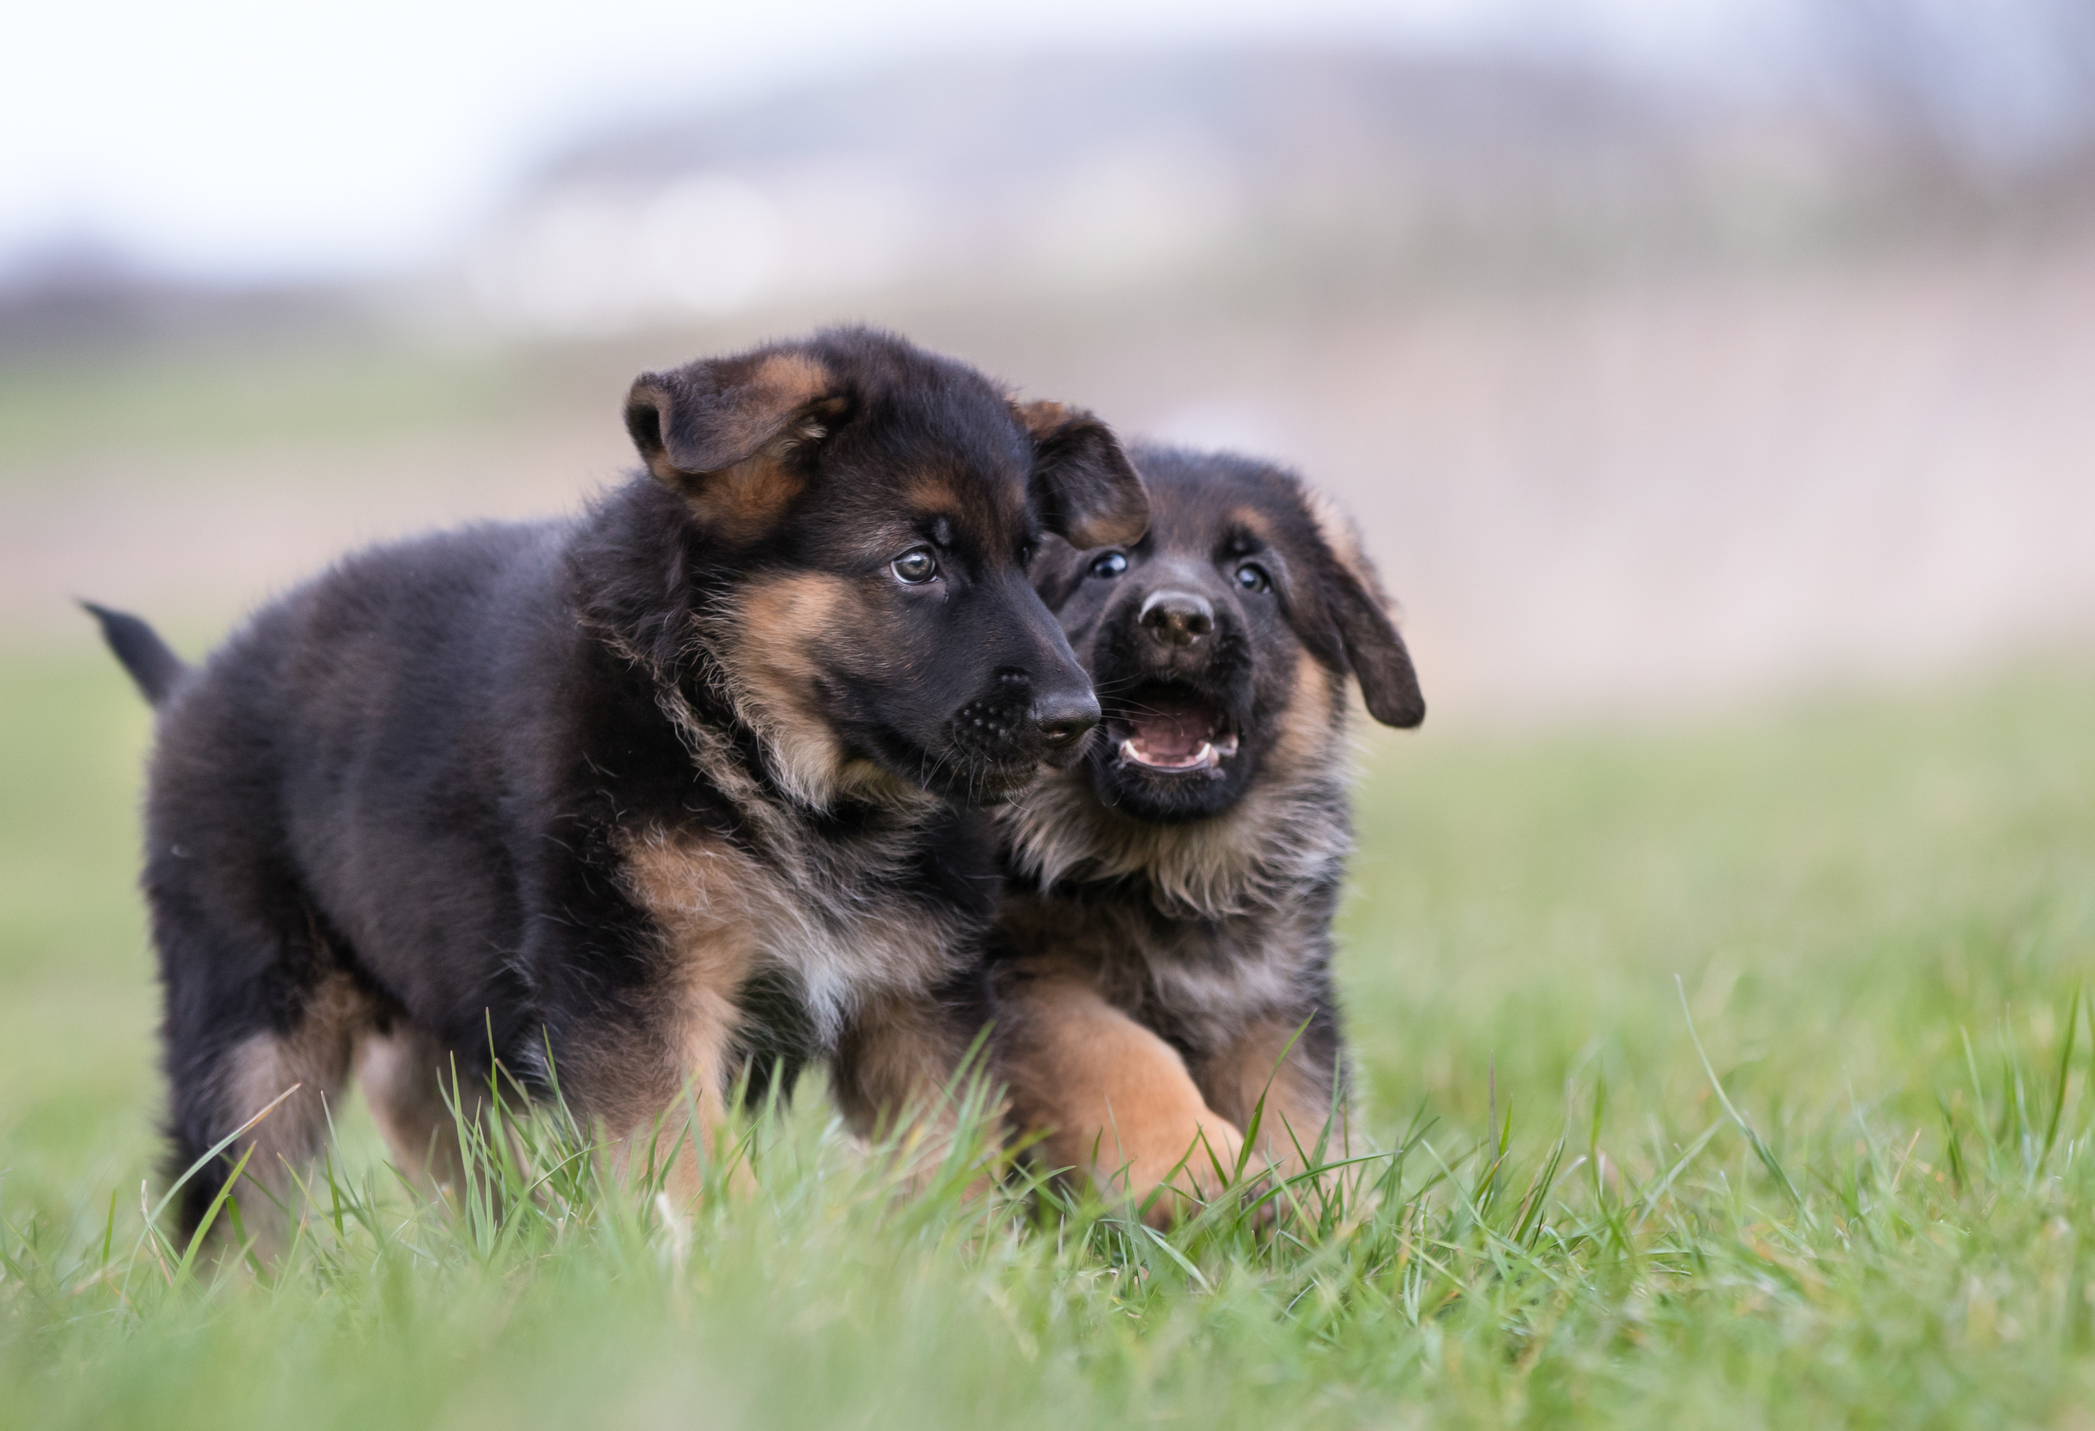 Two purebred young German Shepherd dog puppies playing outdoors on a grass field on a sunny spring day.